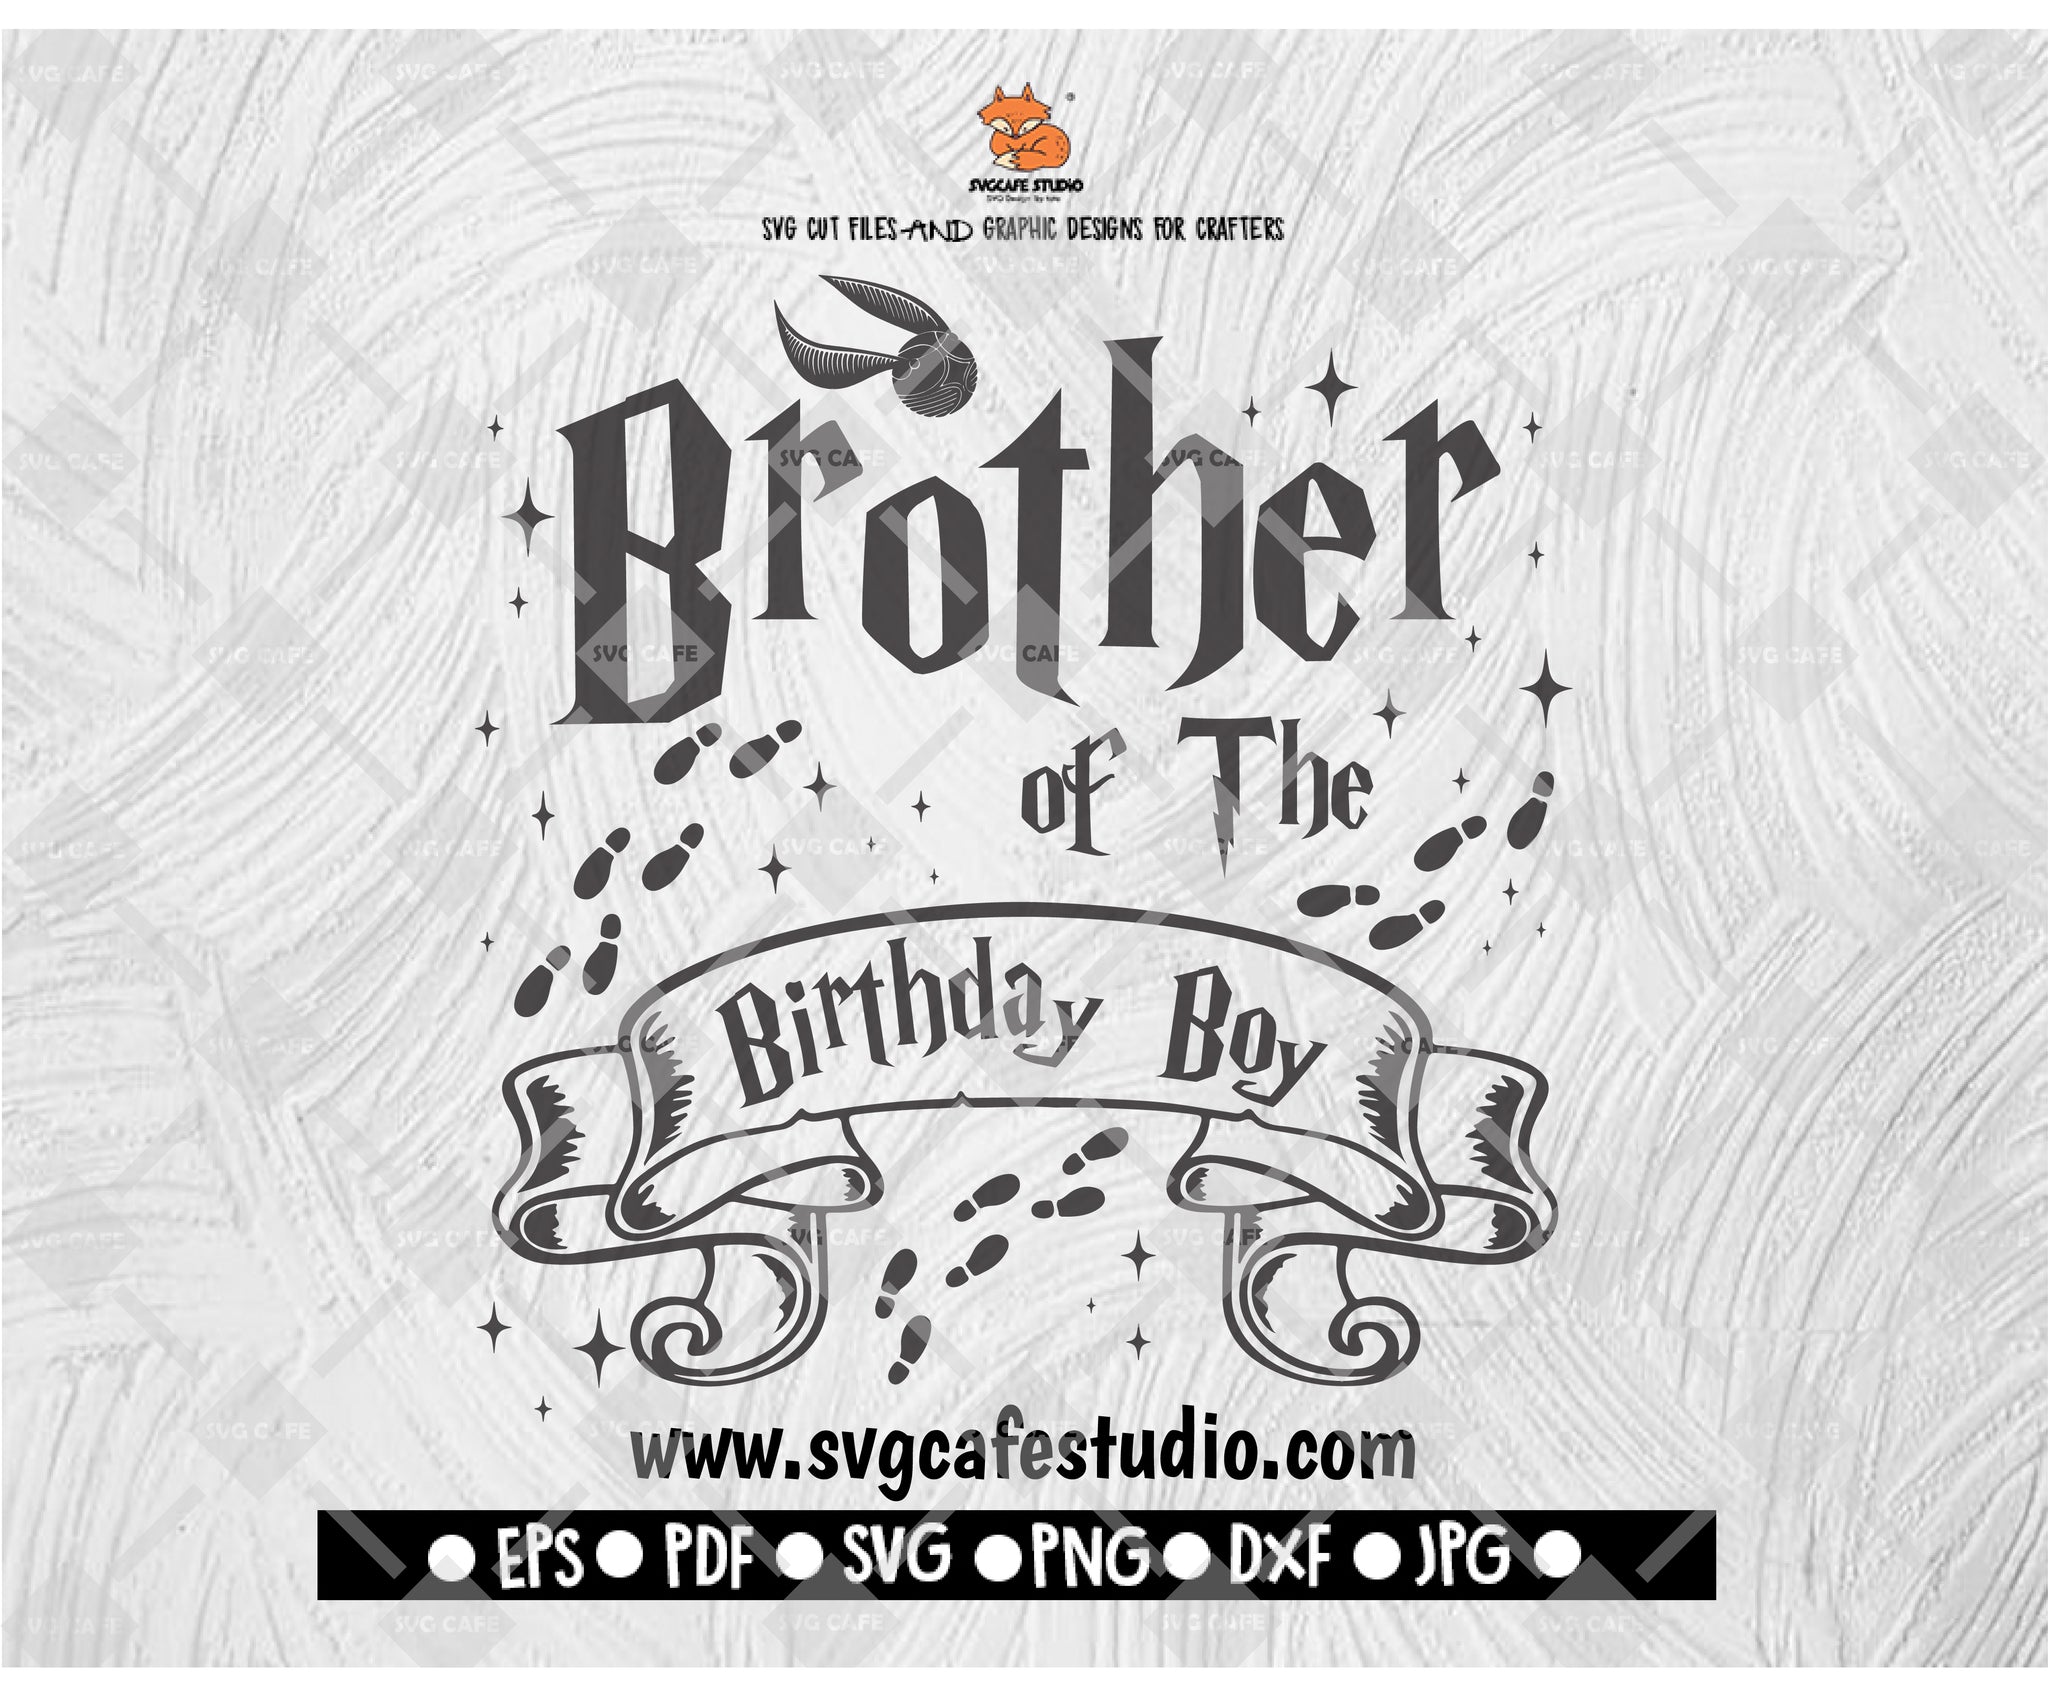 Brother of the birthday Boy Birthday Squad SVG Wizard Magical Digital Download Clipart Cricut Silhouette Cut File svg Cute Birthday Gift Cute